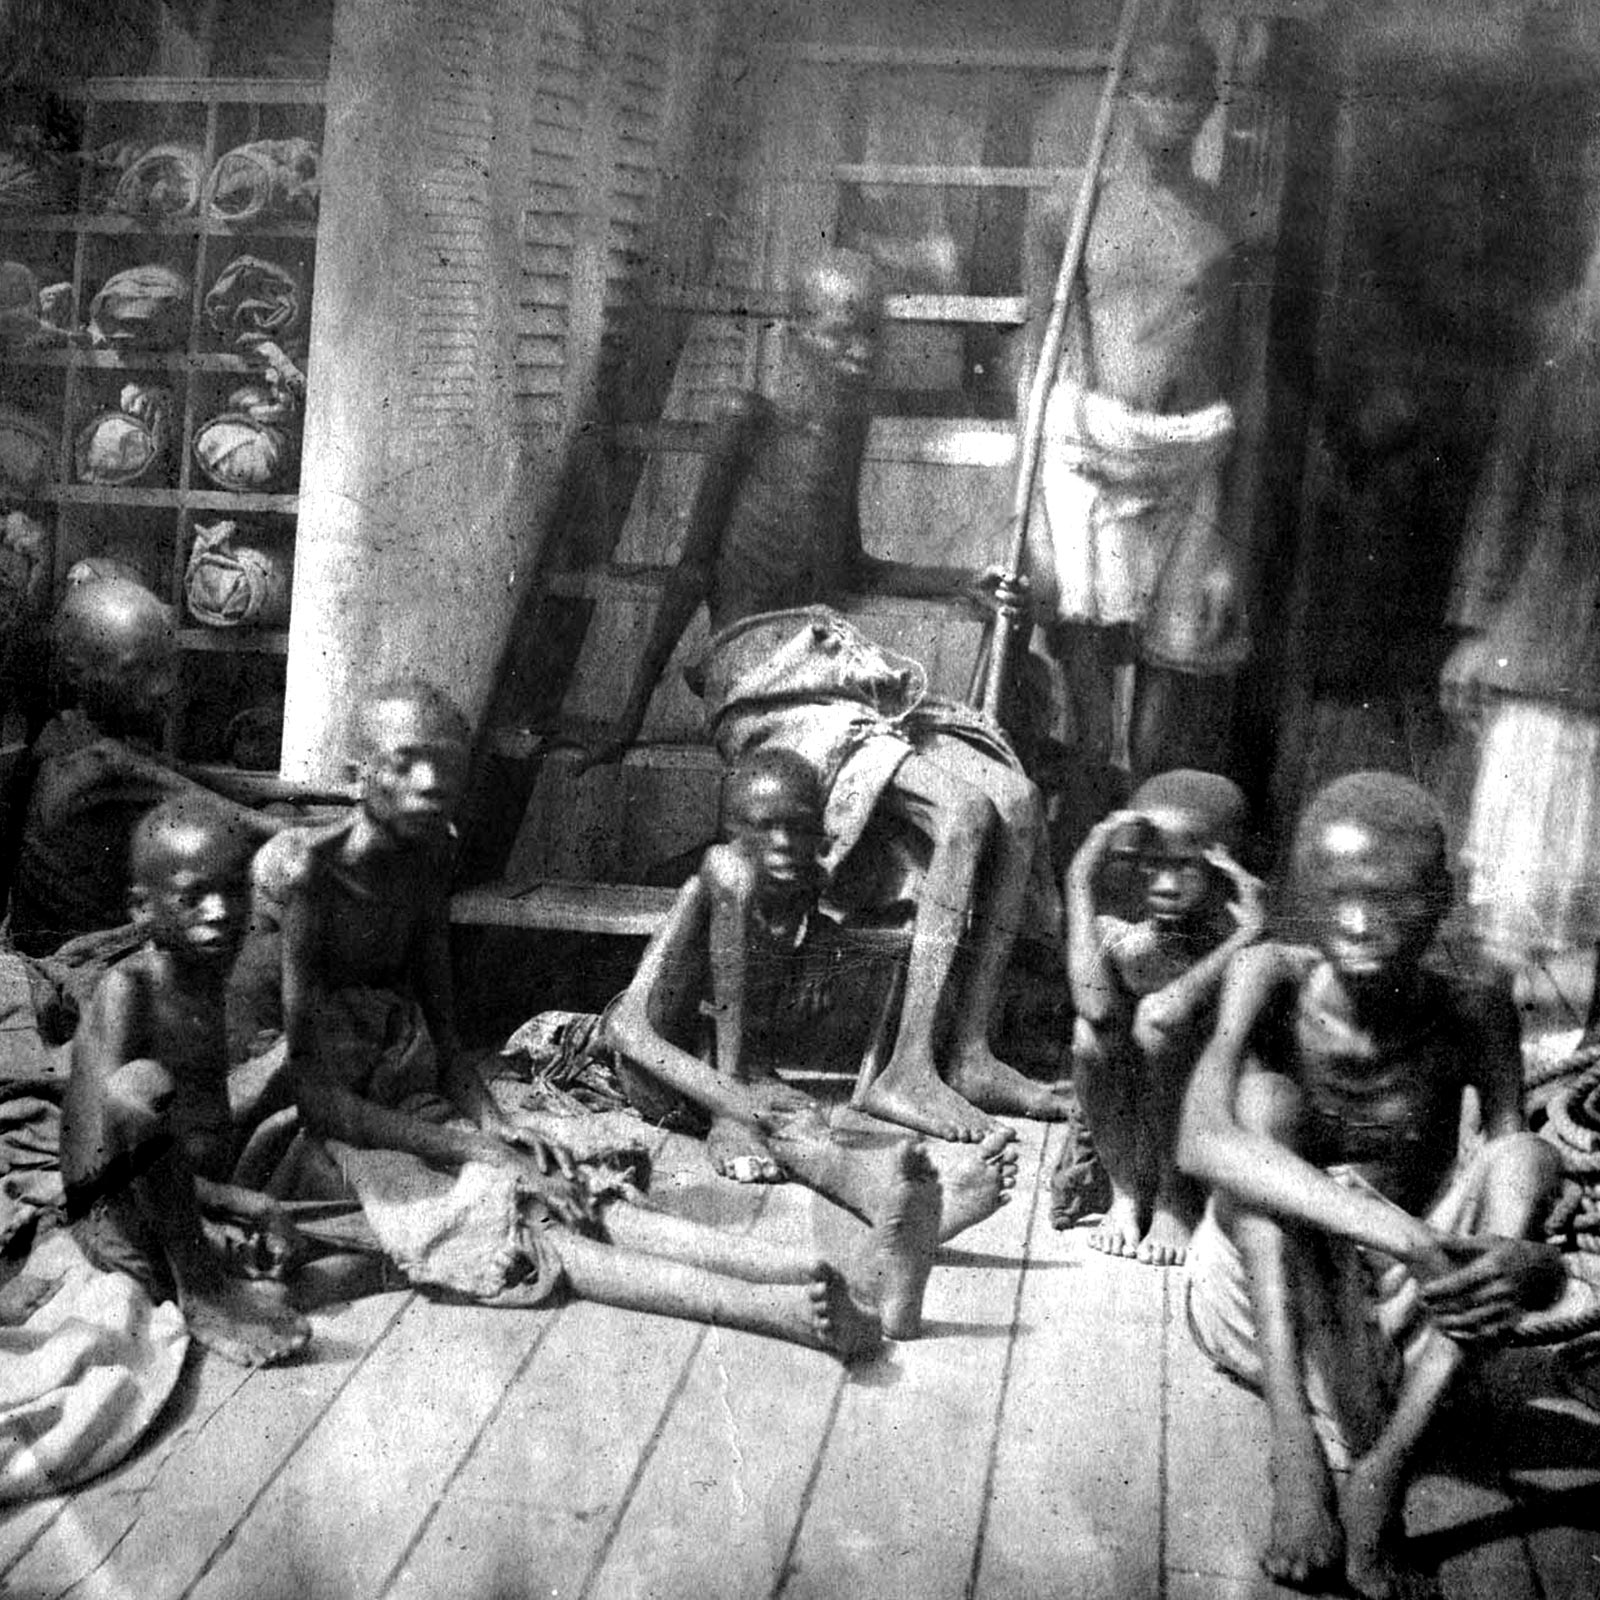 Starving children wearing scraps of clothing who were rescued from a trafficker's ship.